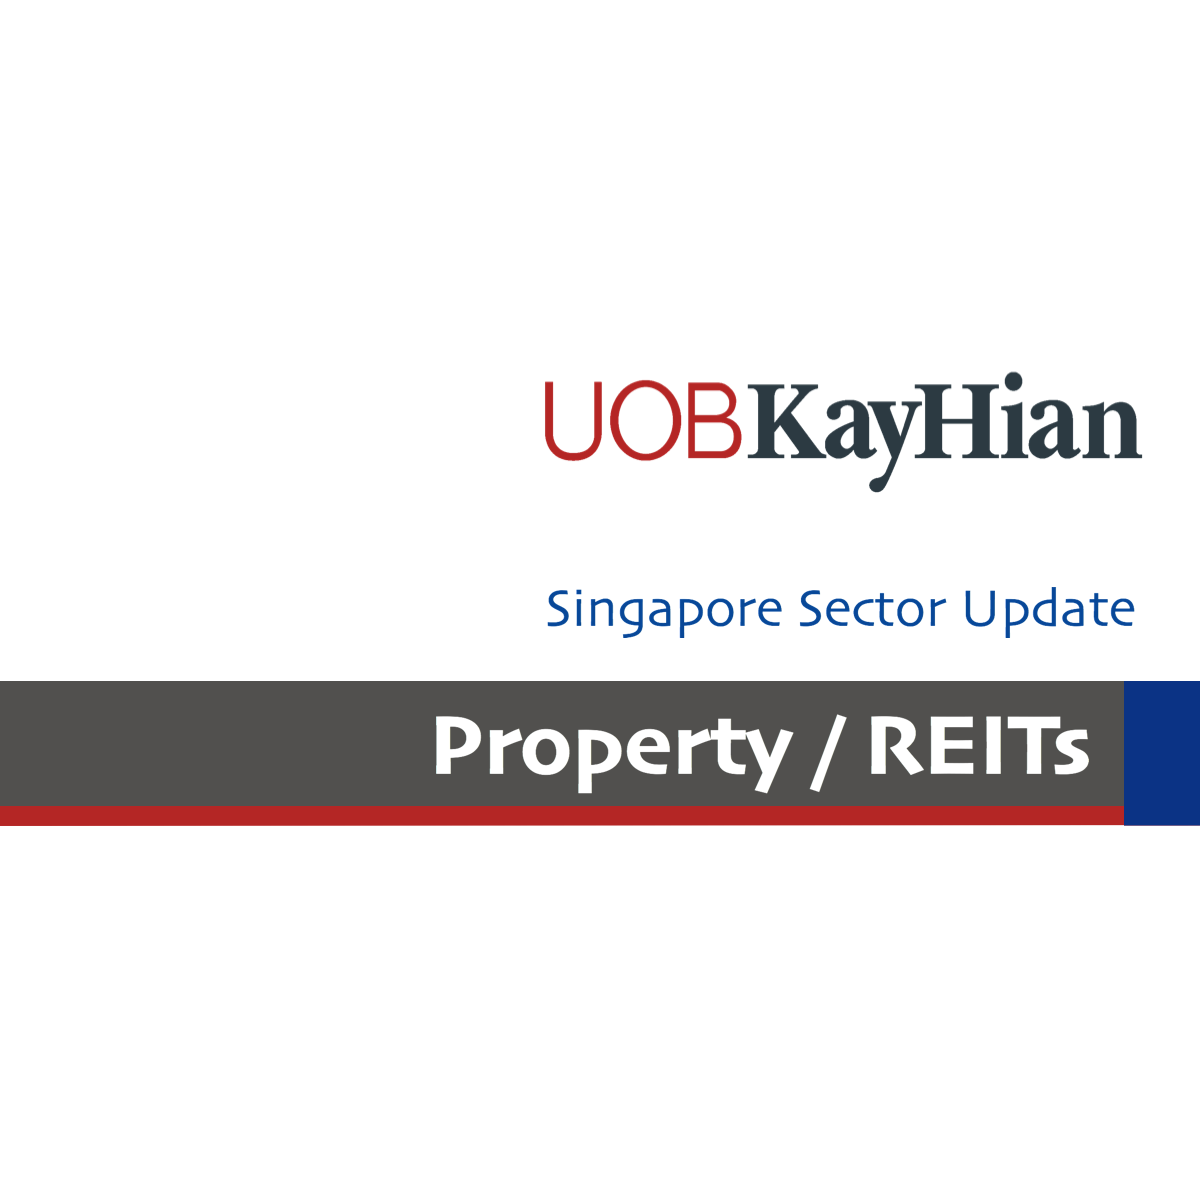 Singapore REITs - UOB Kay Hian 2018-04-12: 1Q18 Results Preview